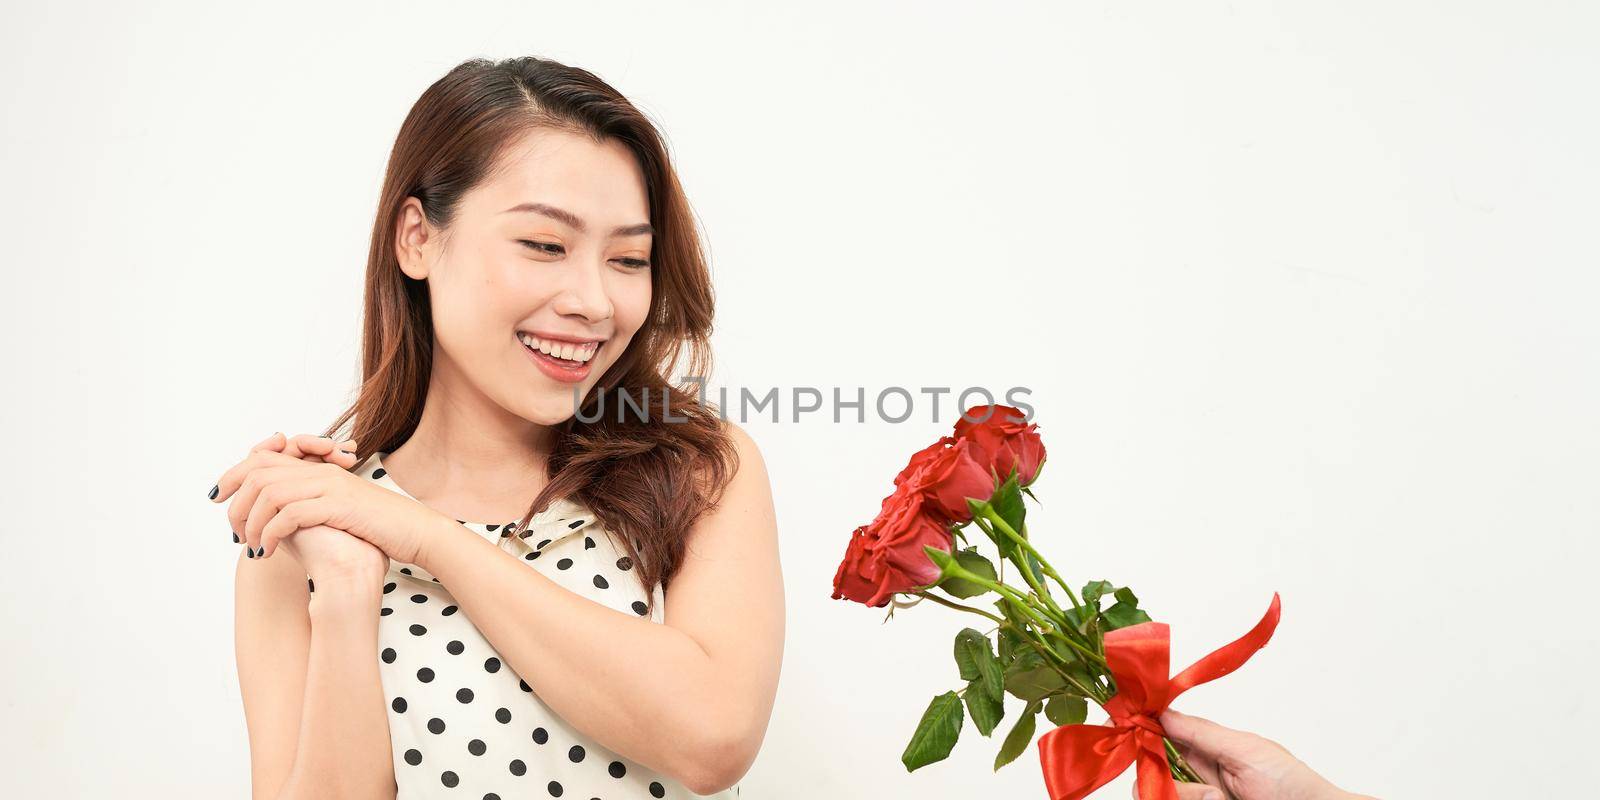 Man giving a bunch of red roses to a surprised woman isolated on white background